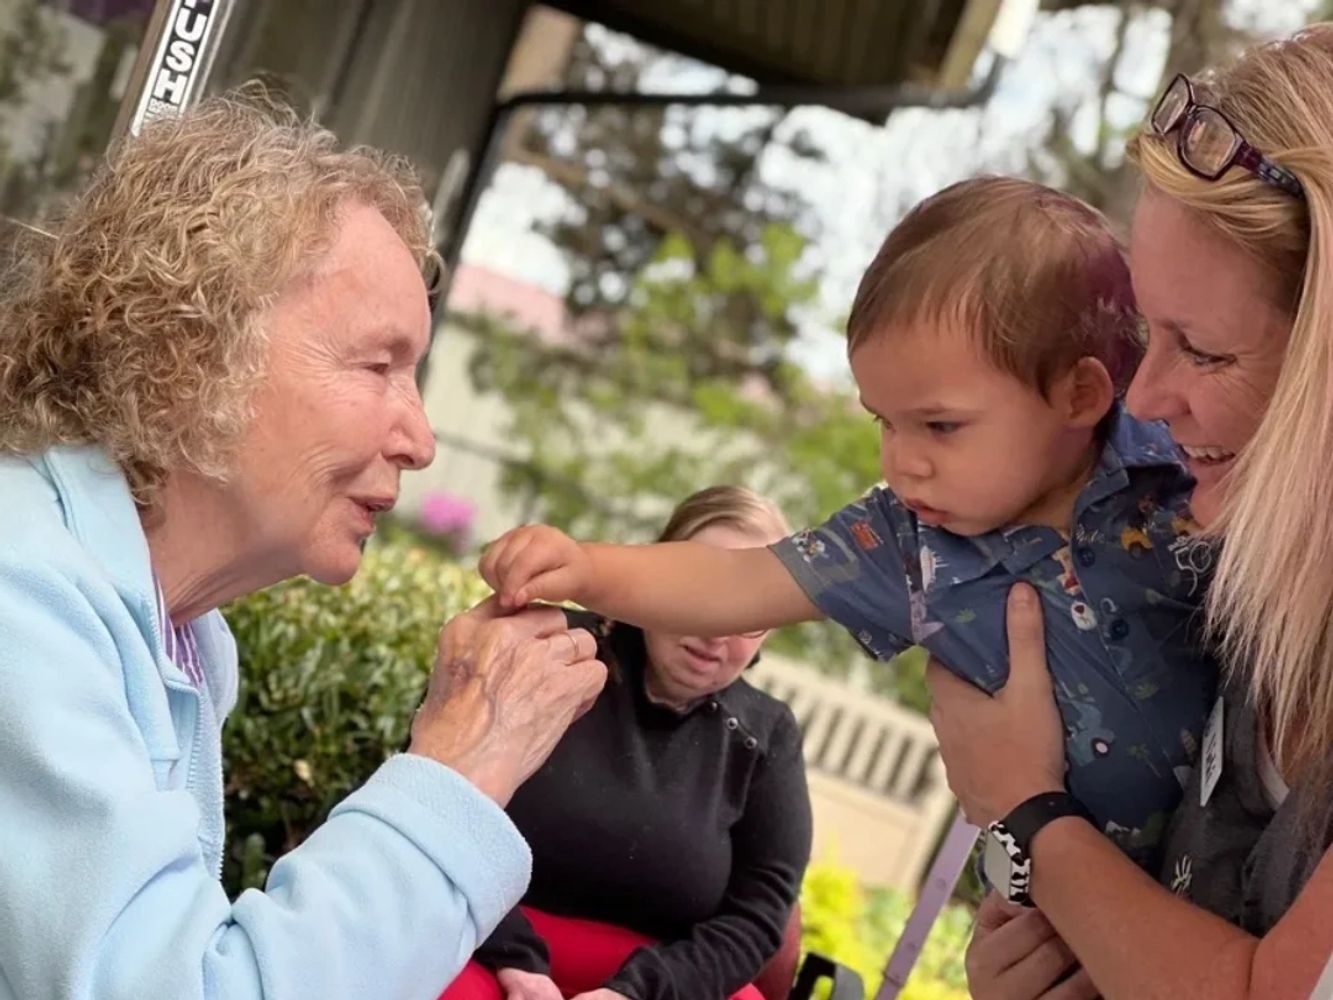 A baby/child plays with an elderly senior woman and they are both happy